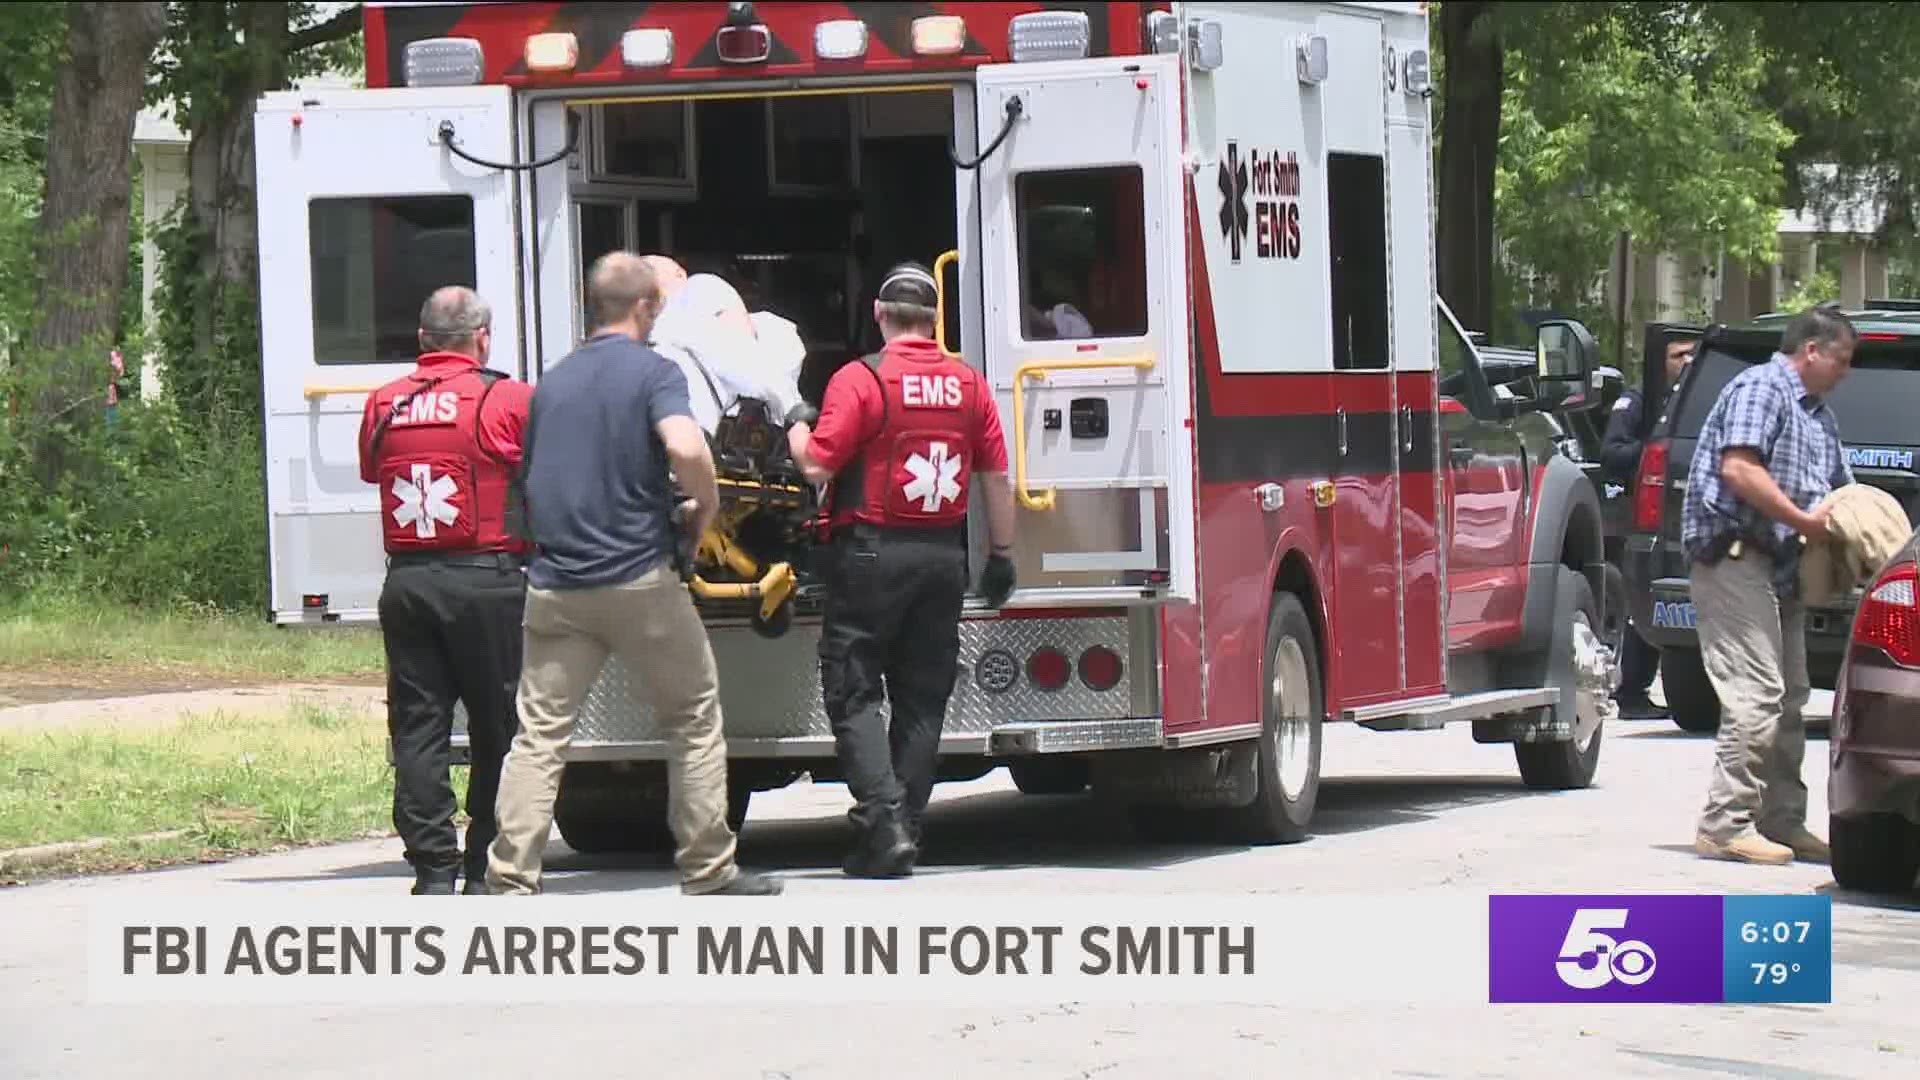 Undercover FBI agents arrested a man in Fort Smith today (May 22) around 1 p.m.